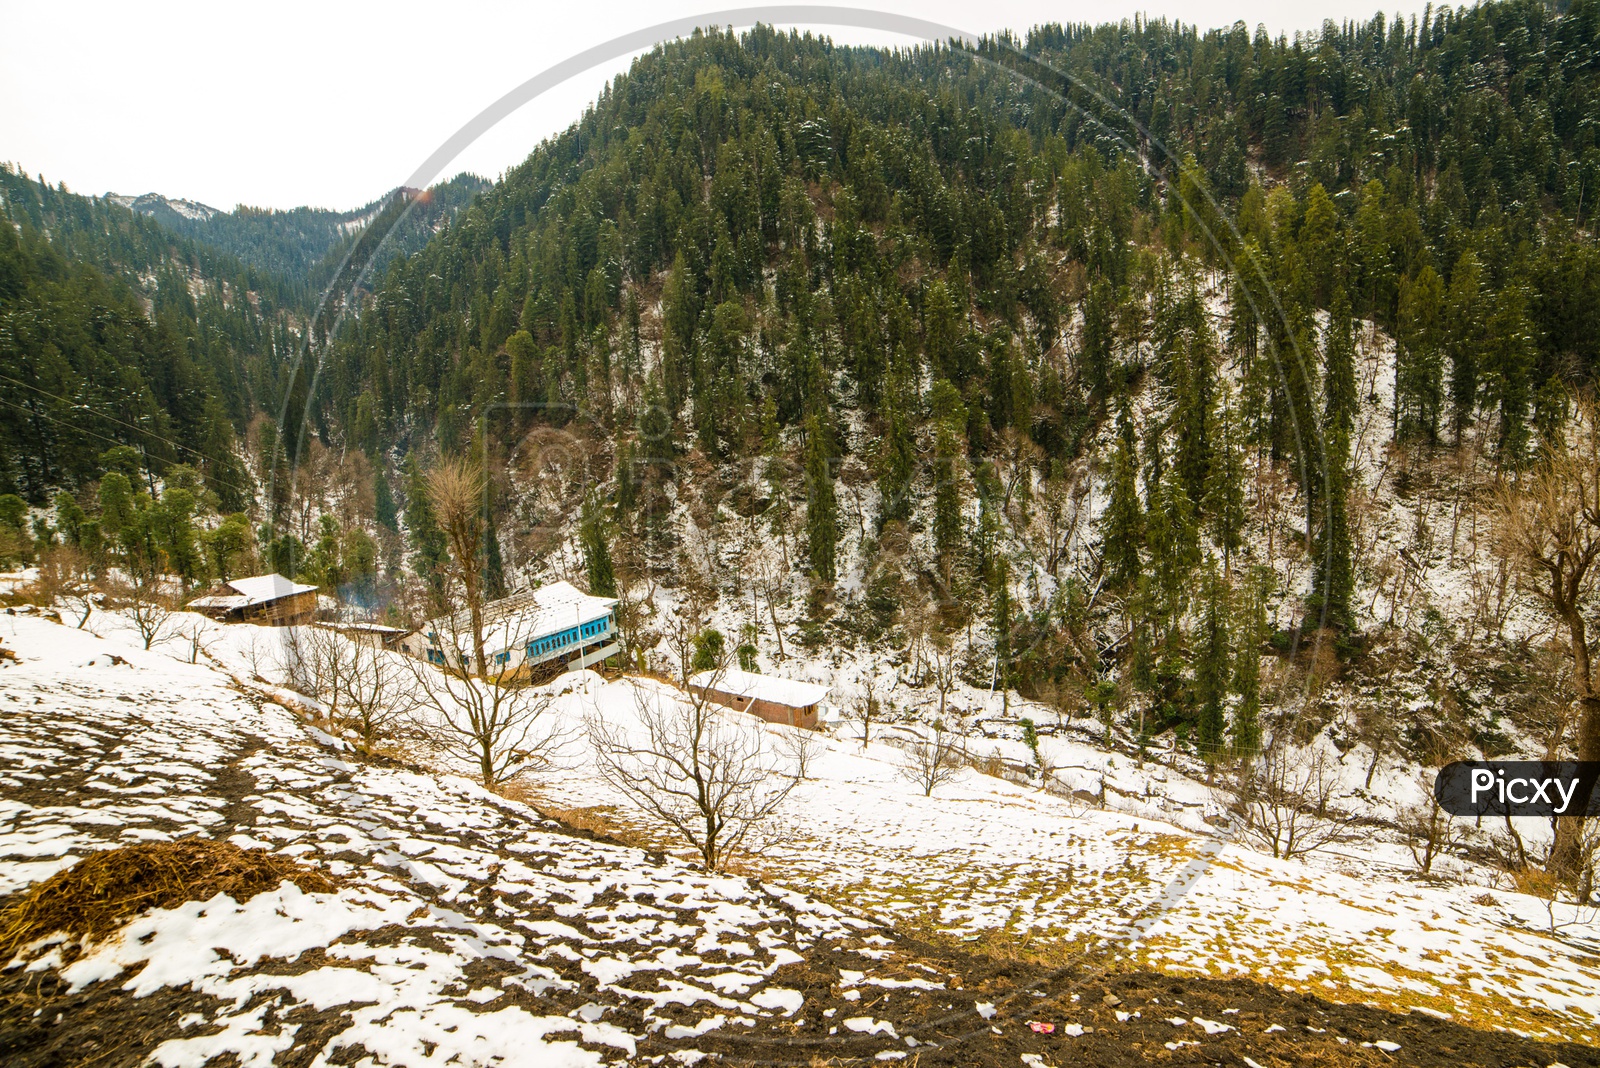 A snowy landscape during winter with spruce trees in Manali